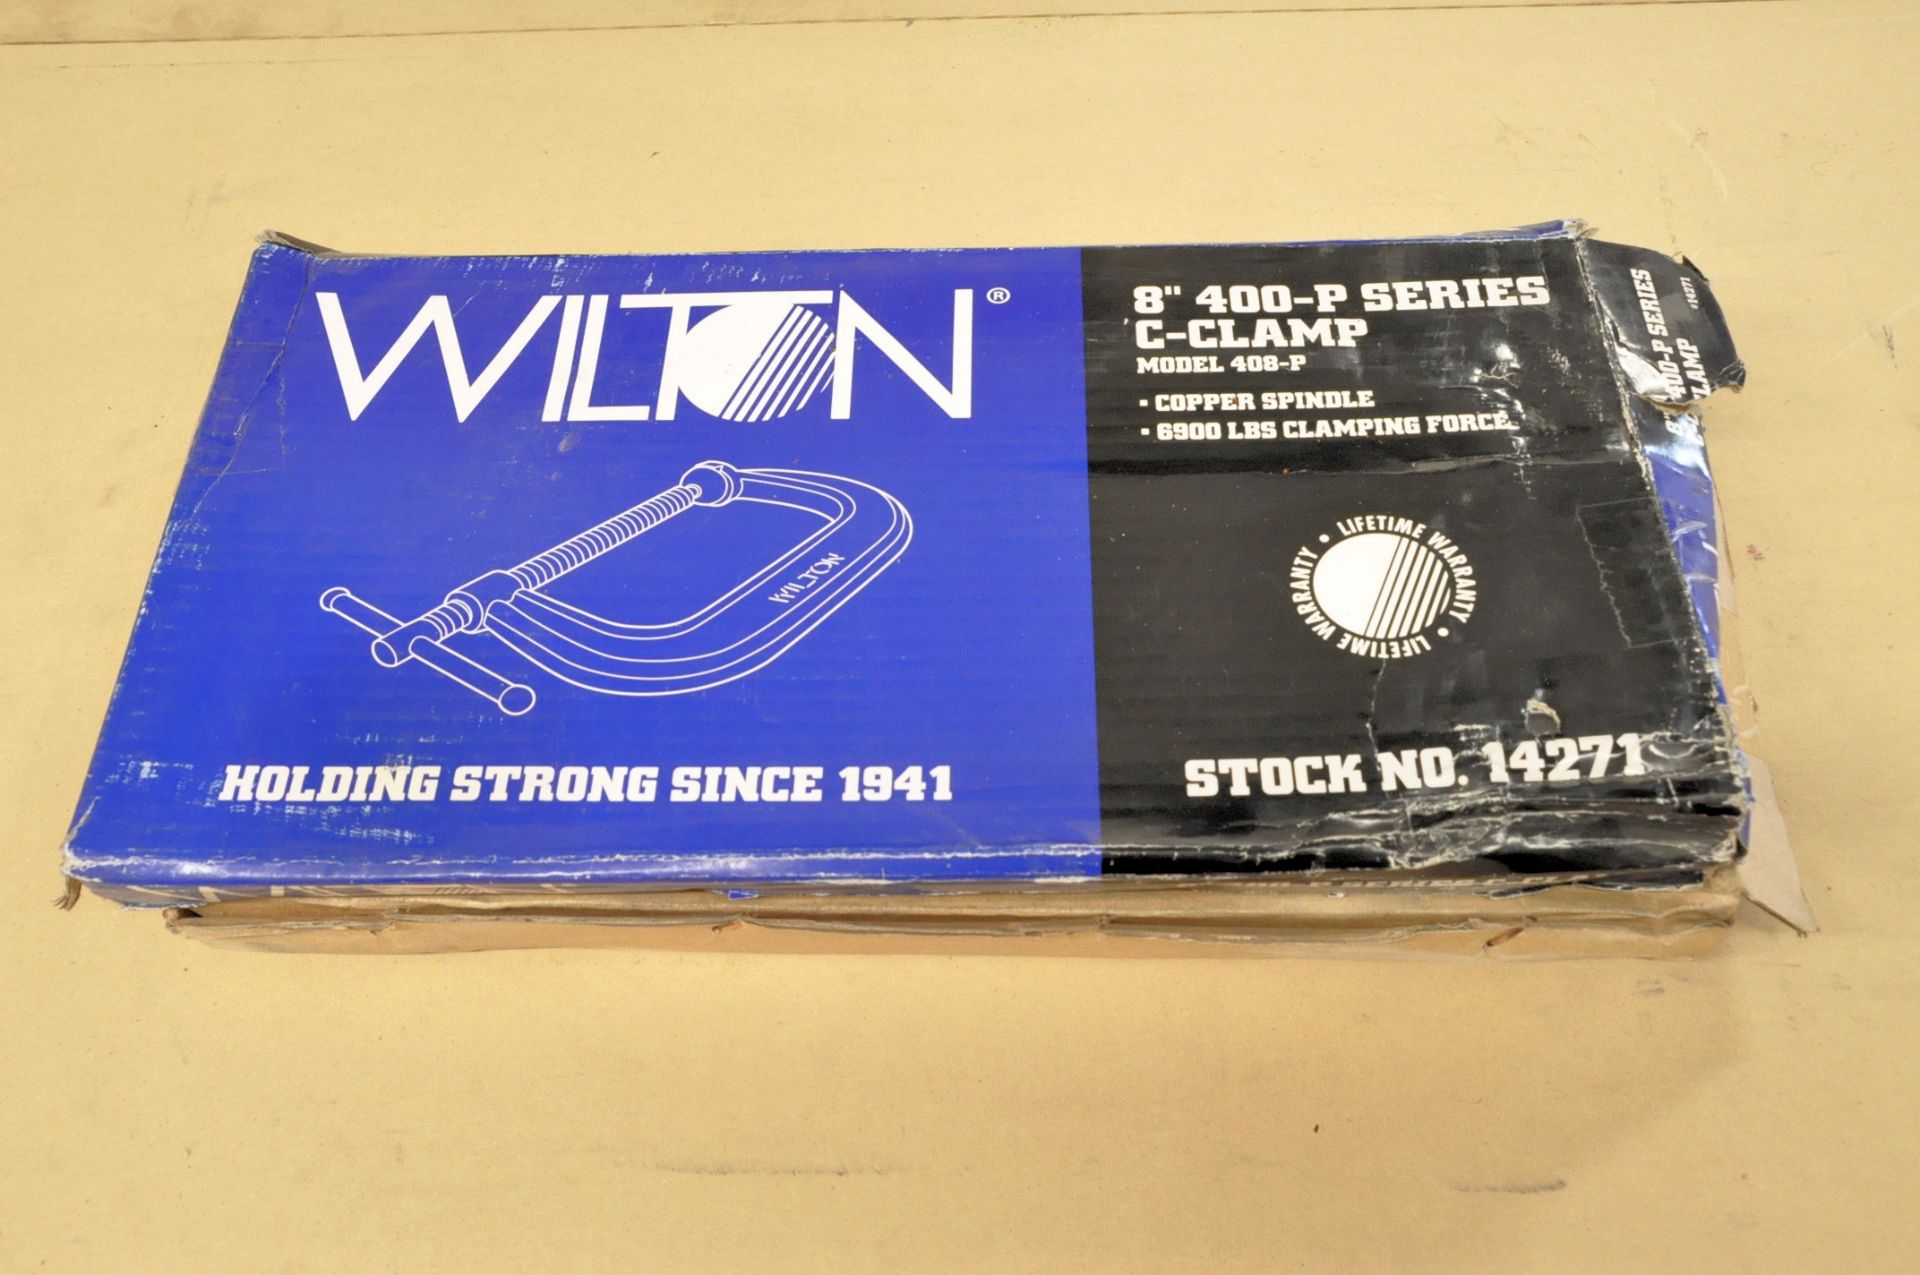 Lot-(1) Wilton No. 408 and (1) No. 408-P, 8" C-Clamps, (Packaged)